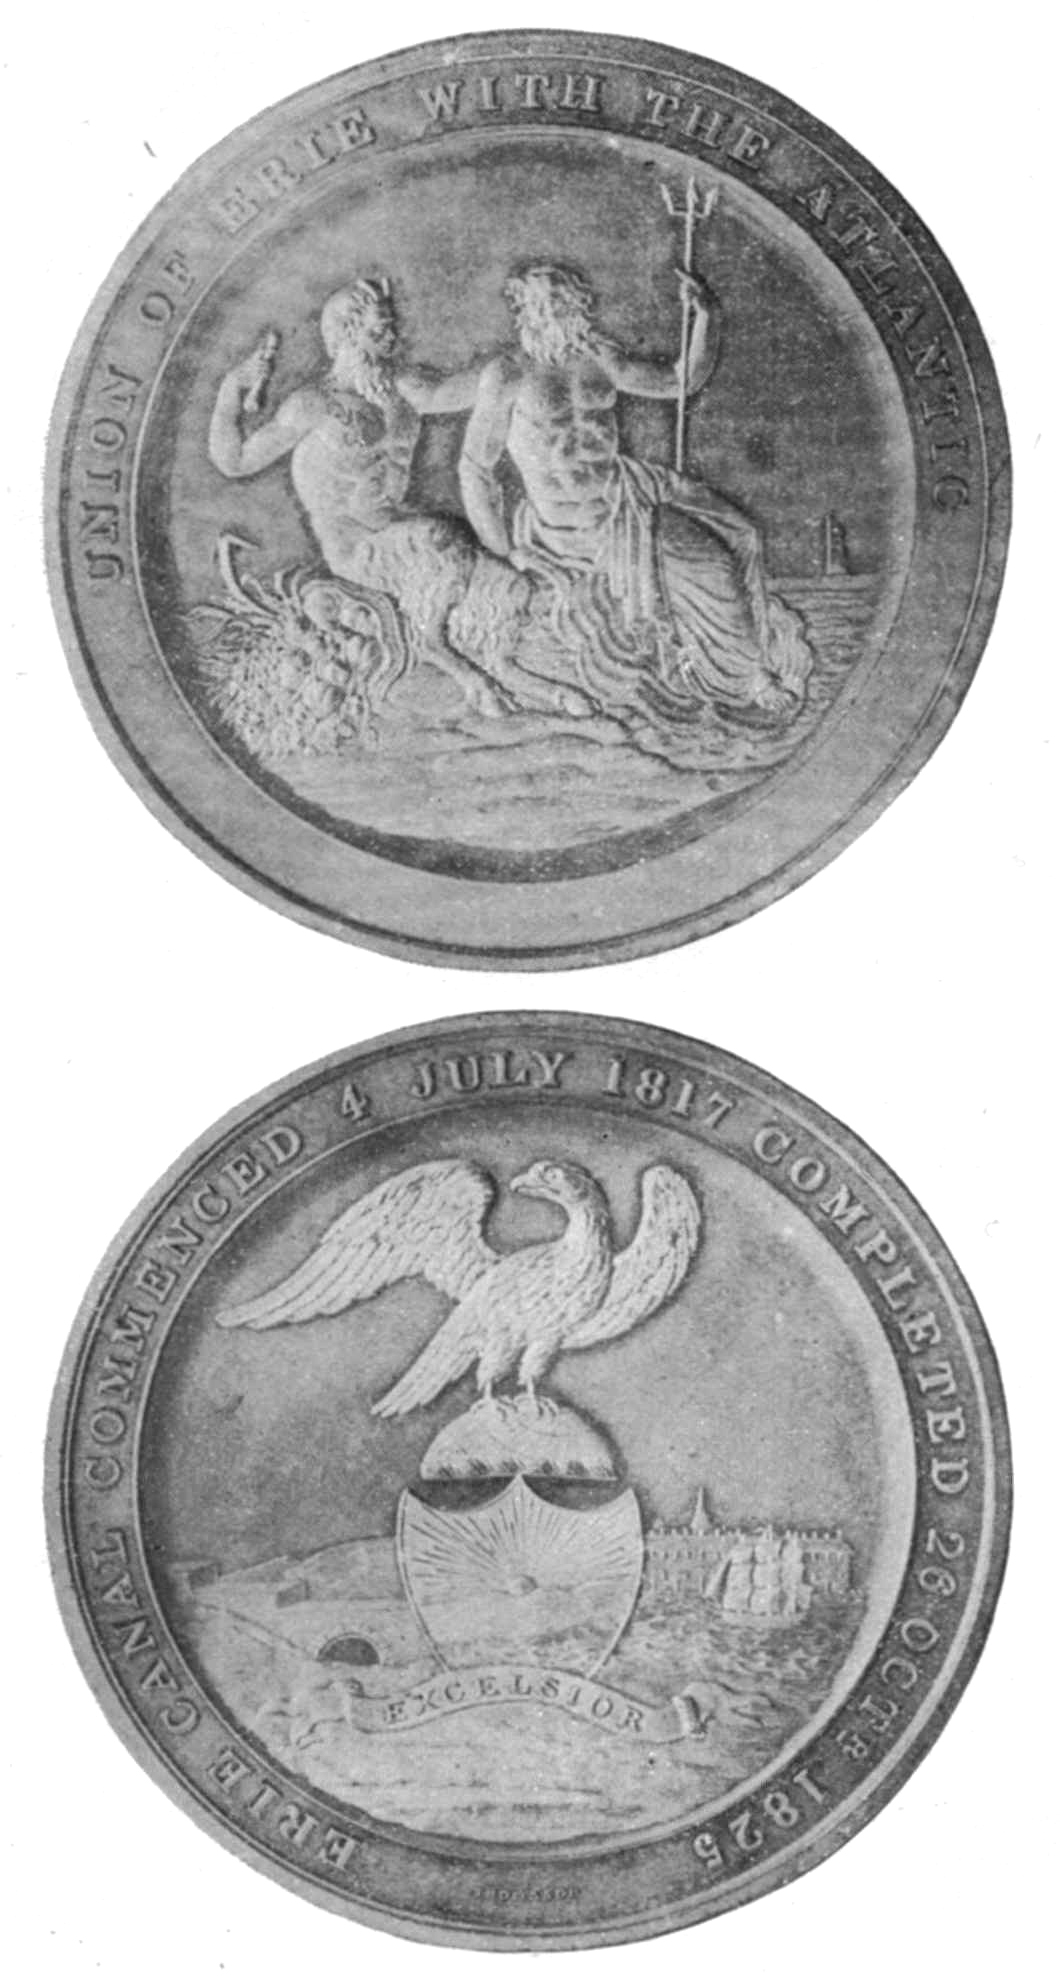 Large Erie Canal commemorative medals